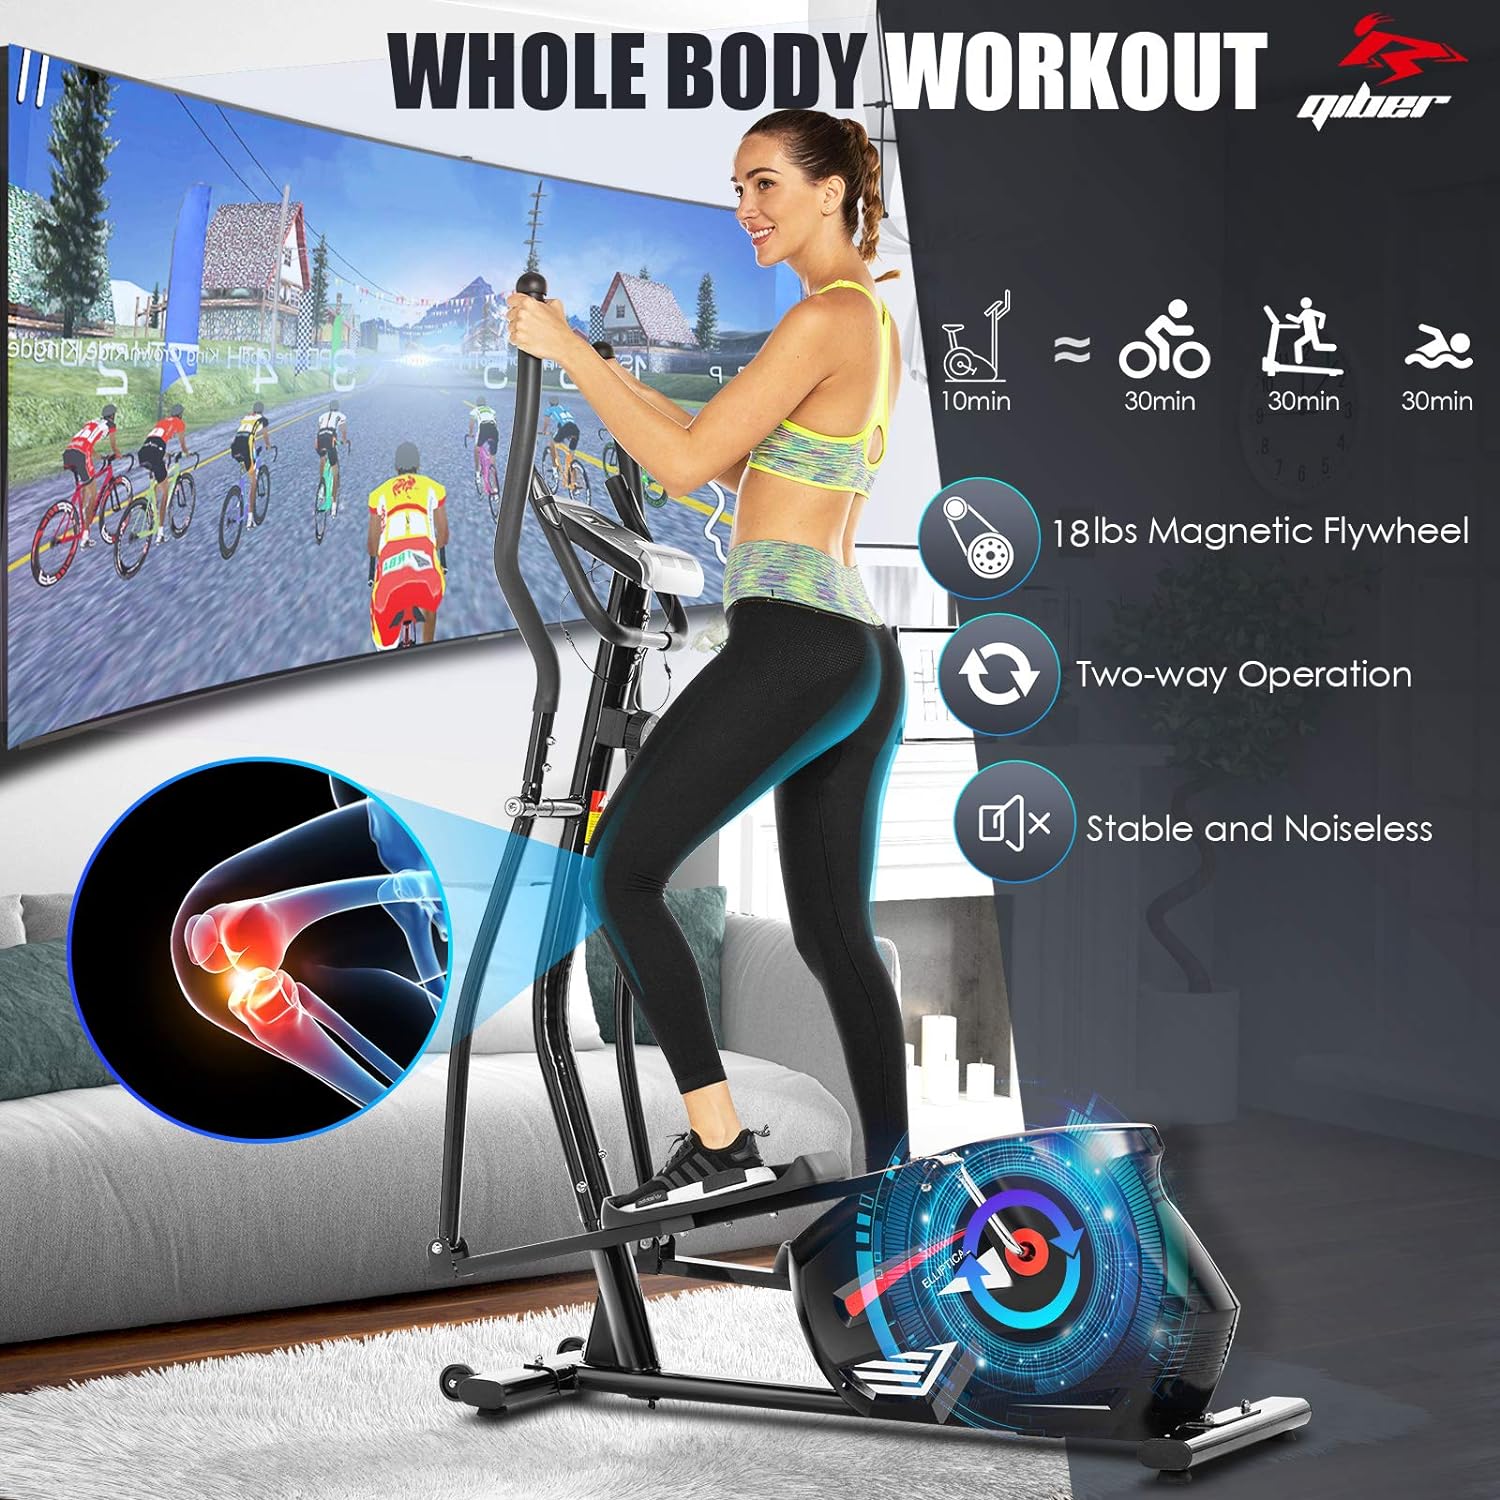 funmily Adjustable 10 Level Elliptical Machines for Home Use with Smart APP&Large LCD Display, 390lb Capacity Elliptical Cross Trainer